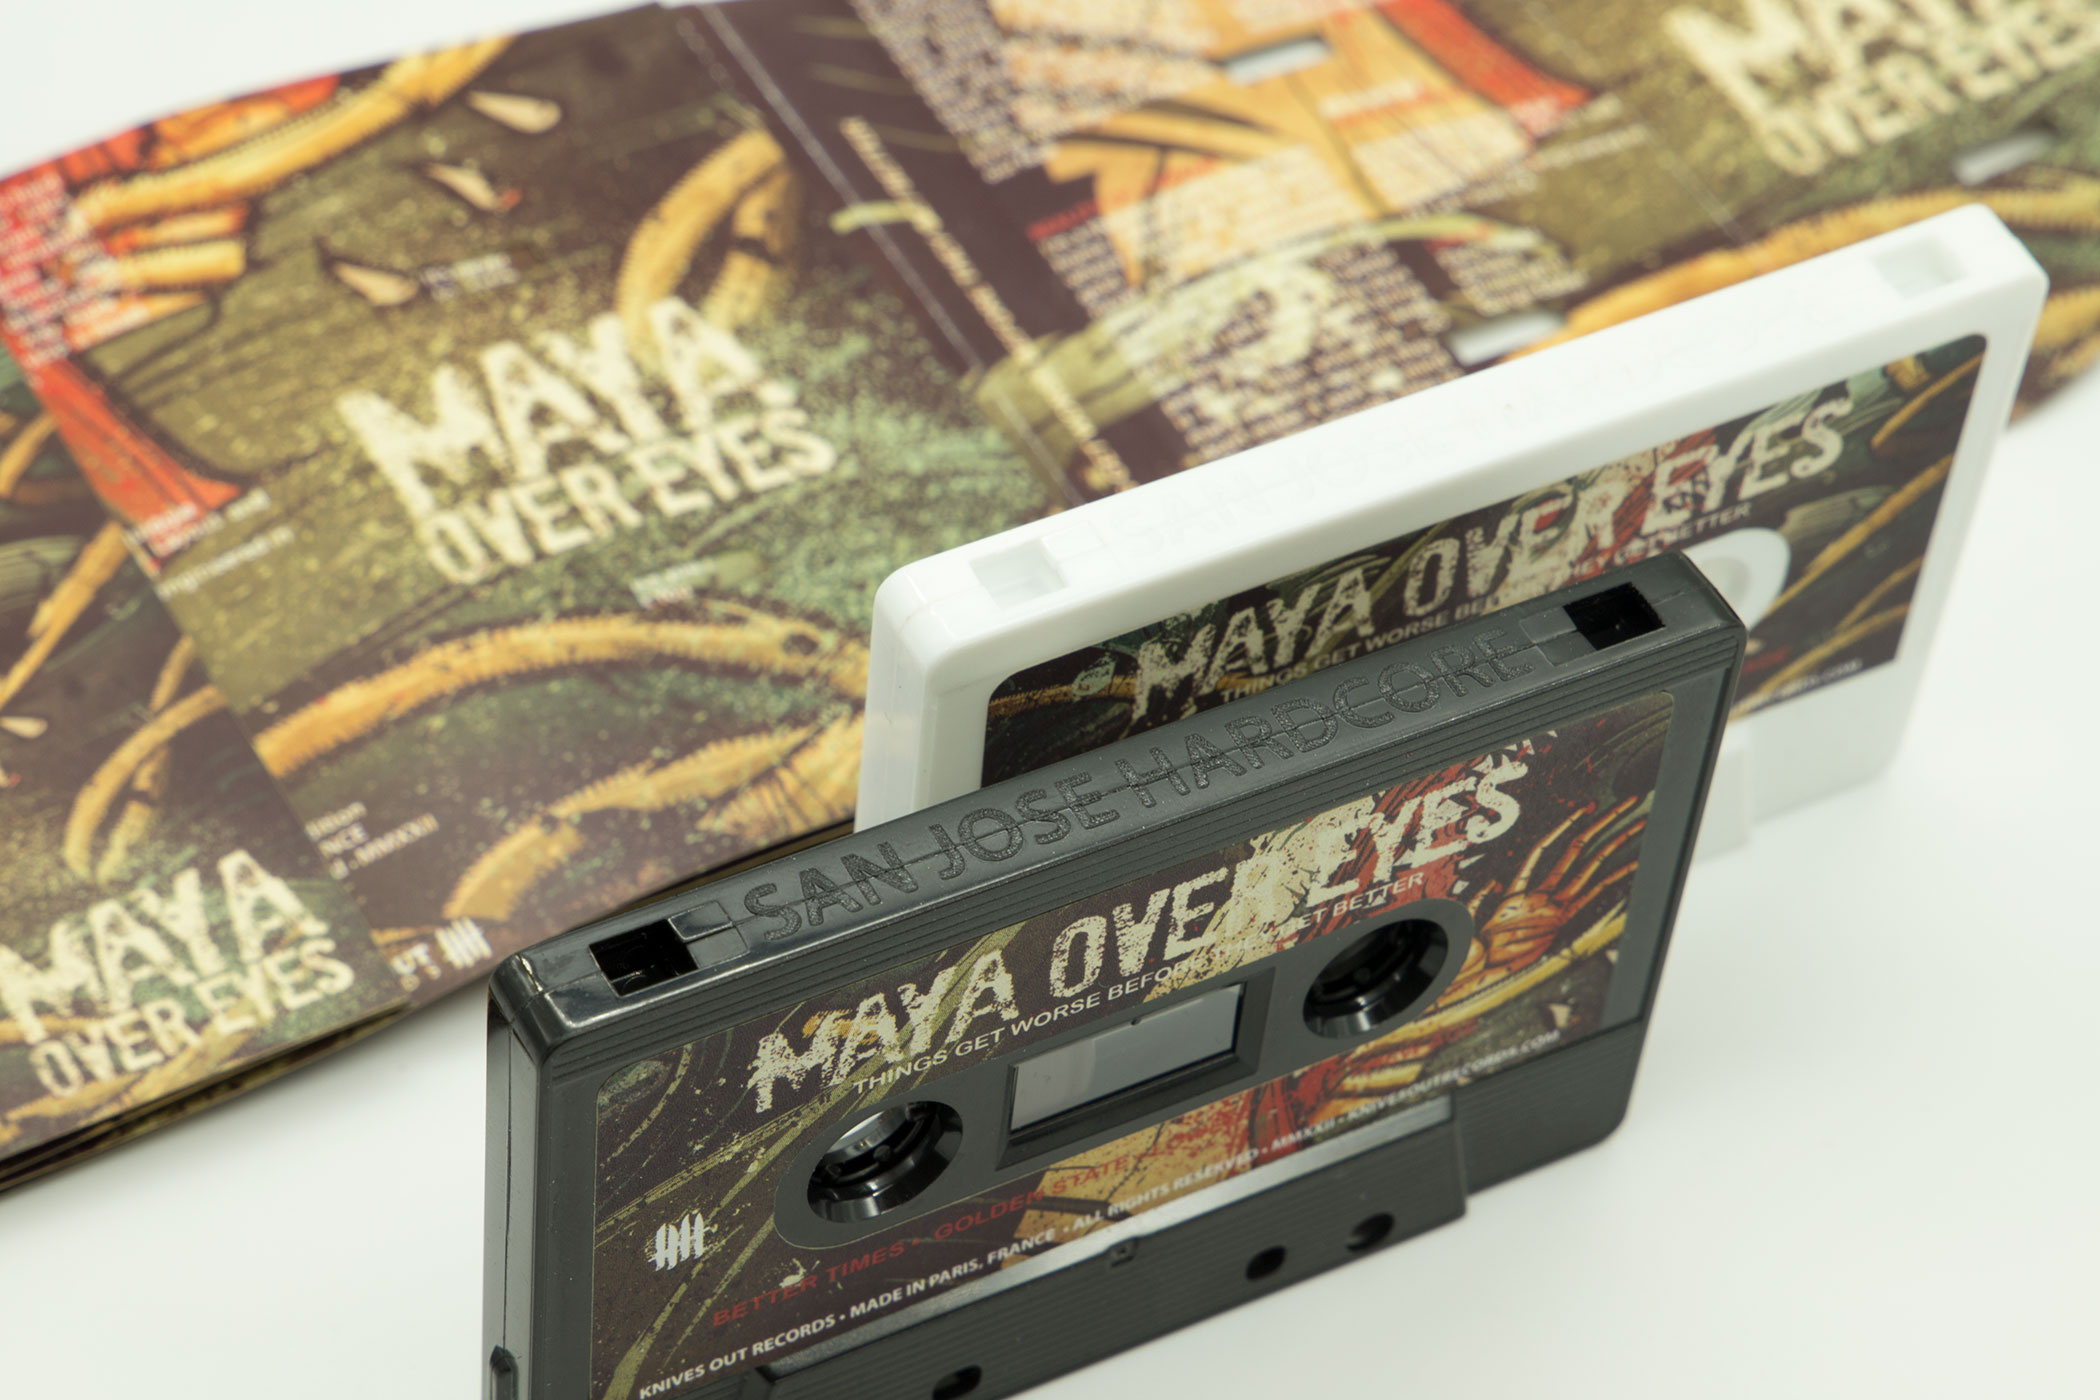 MAYA OVER EYES “Things Get Worse Before They Get Better” Etched Cassette Tape